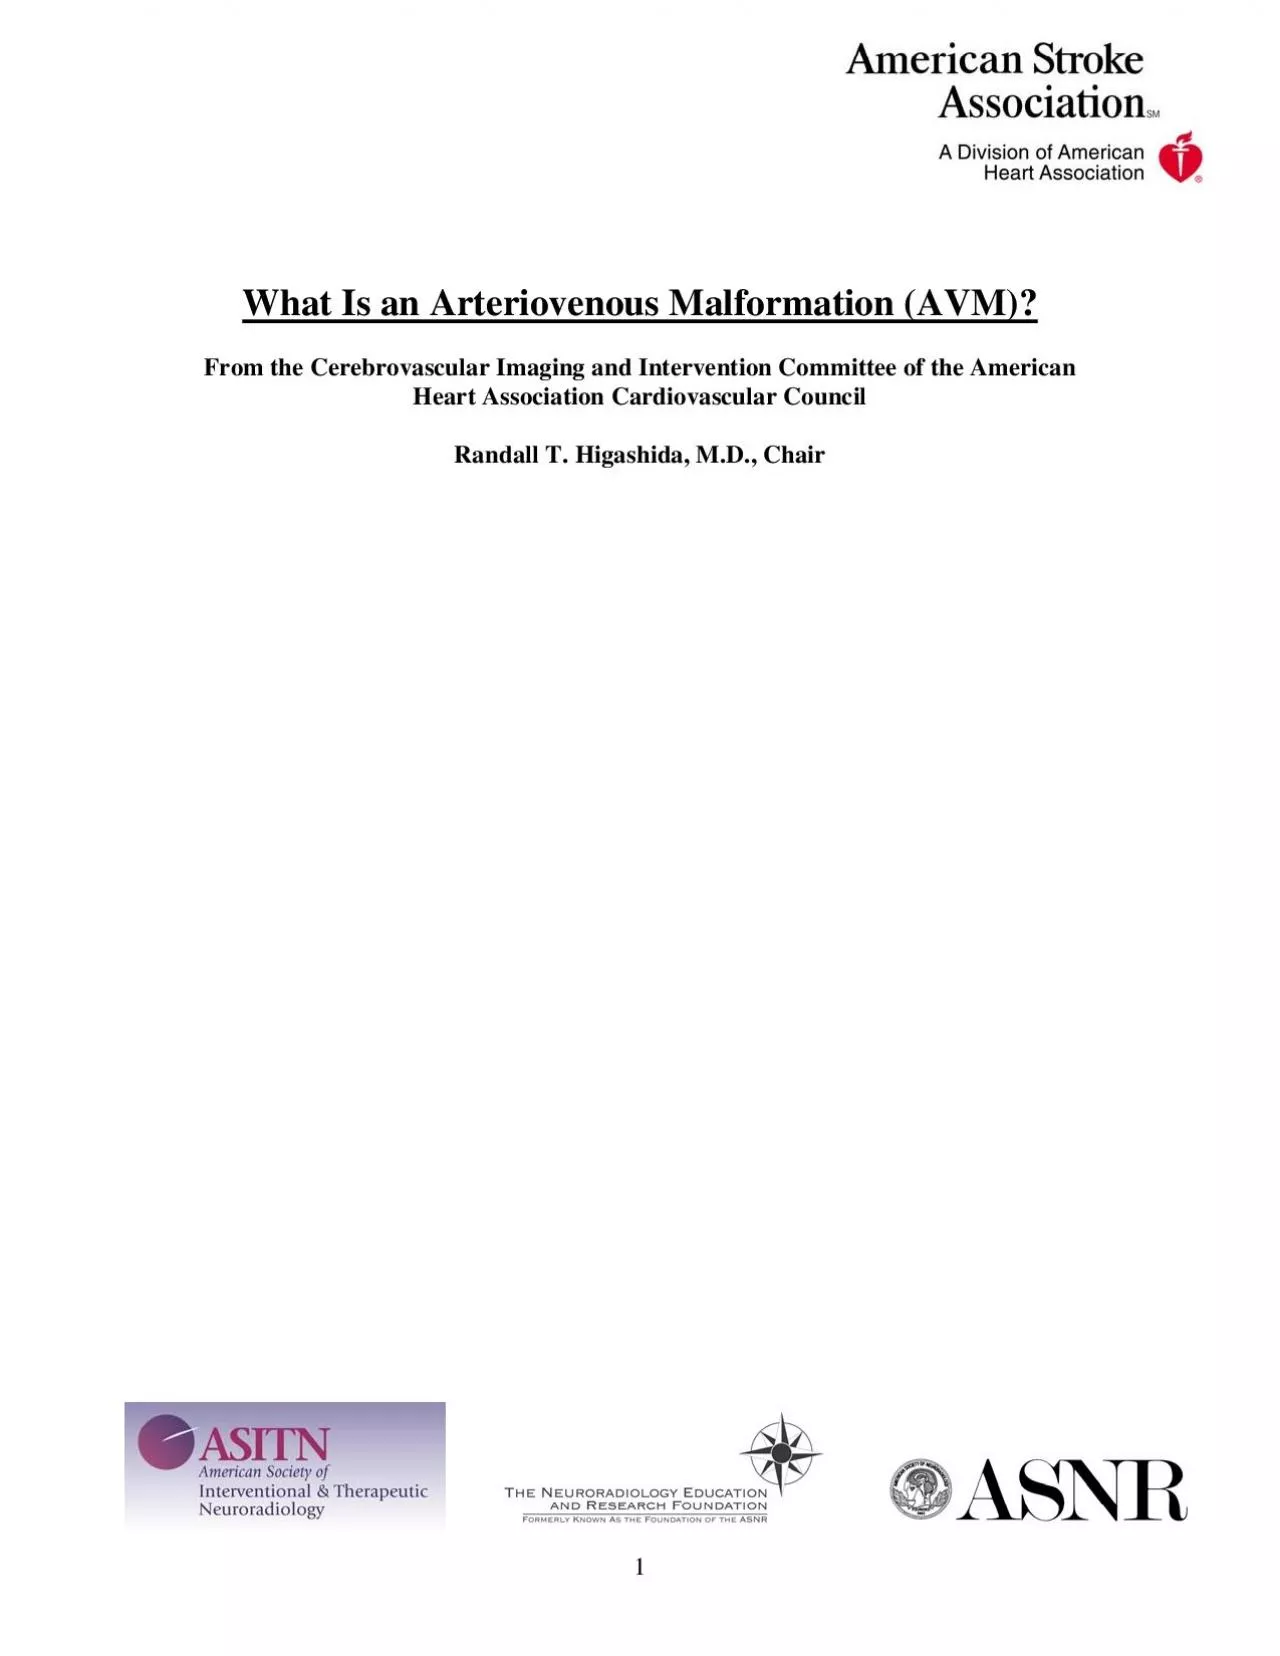 What Is an Arteriovenous Malformation AVM